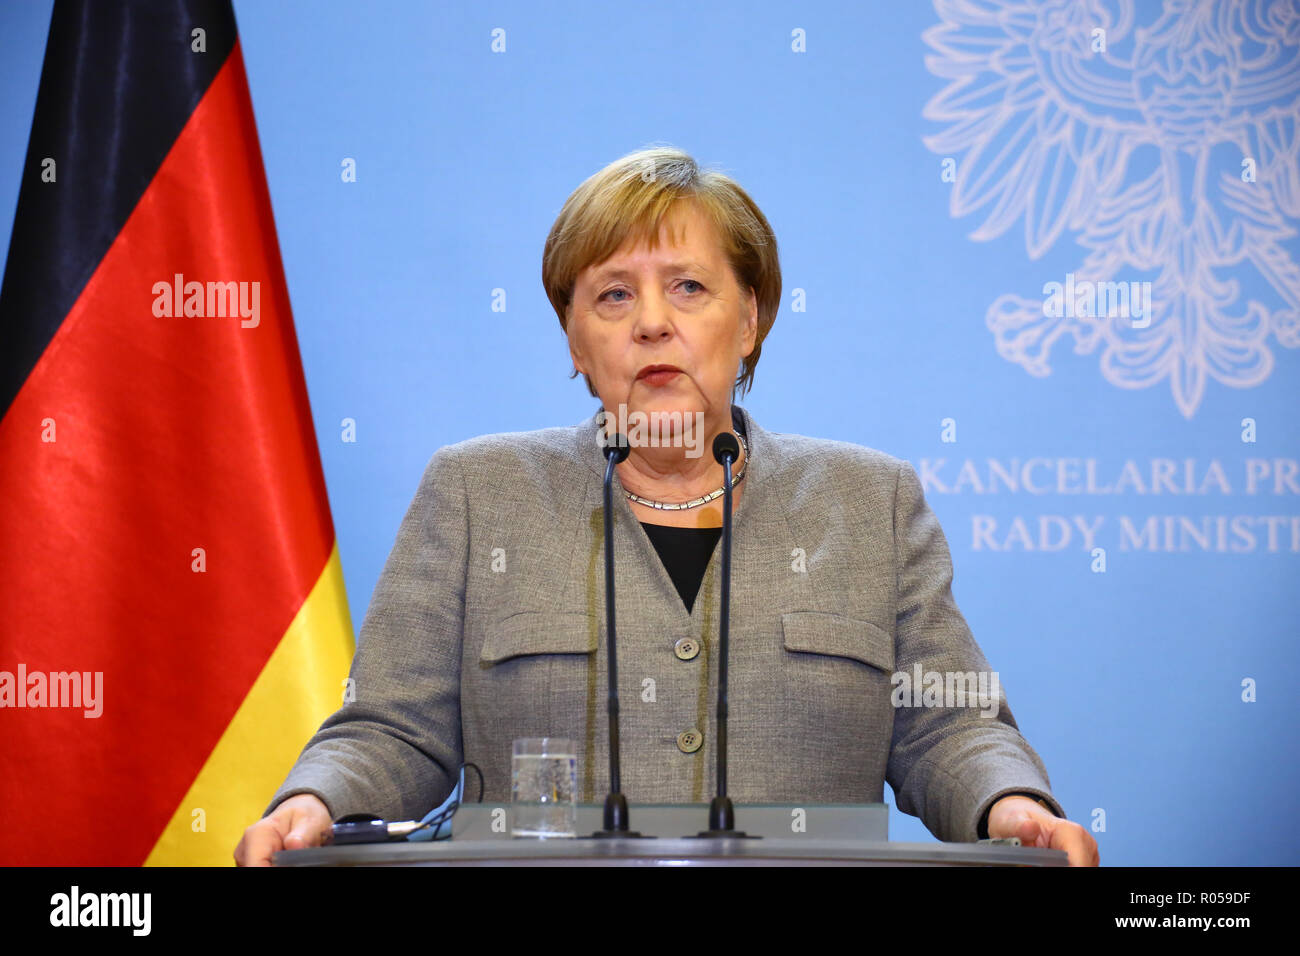 Warsaw, Poland, 2nd November 2018: Prime Minister Mateusz Morawiecki held joint press conference with Chancellor Merkel after Polish-German government consultations. ©Jake Ratz/Alamy Live News Stock Photo